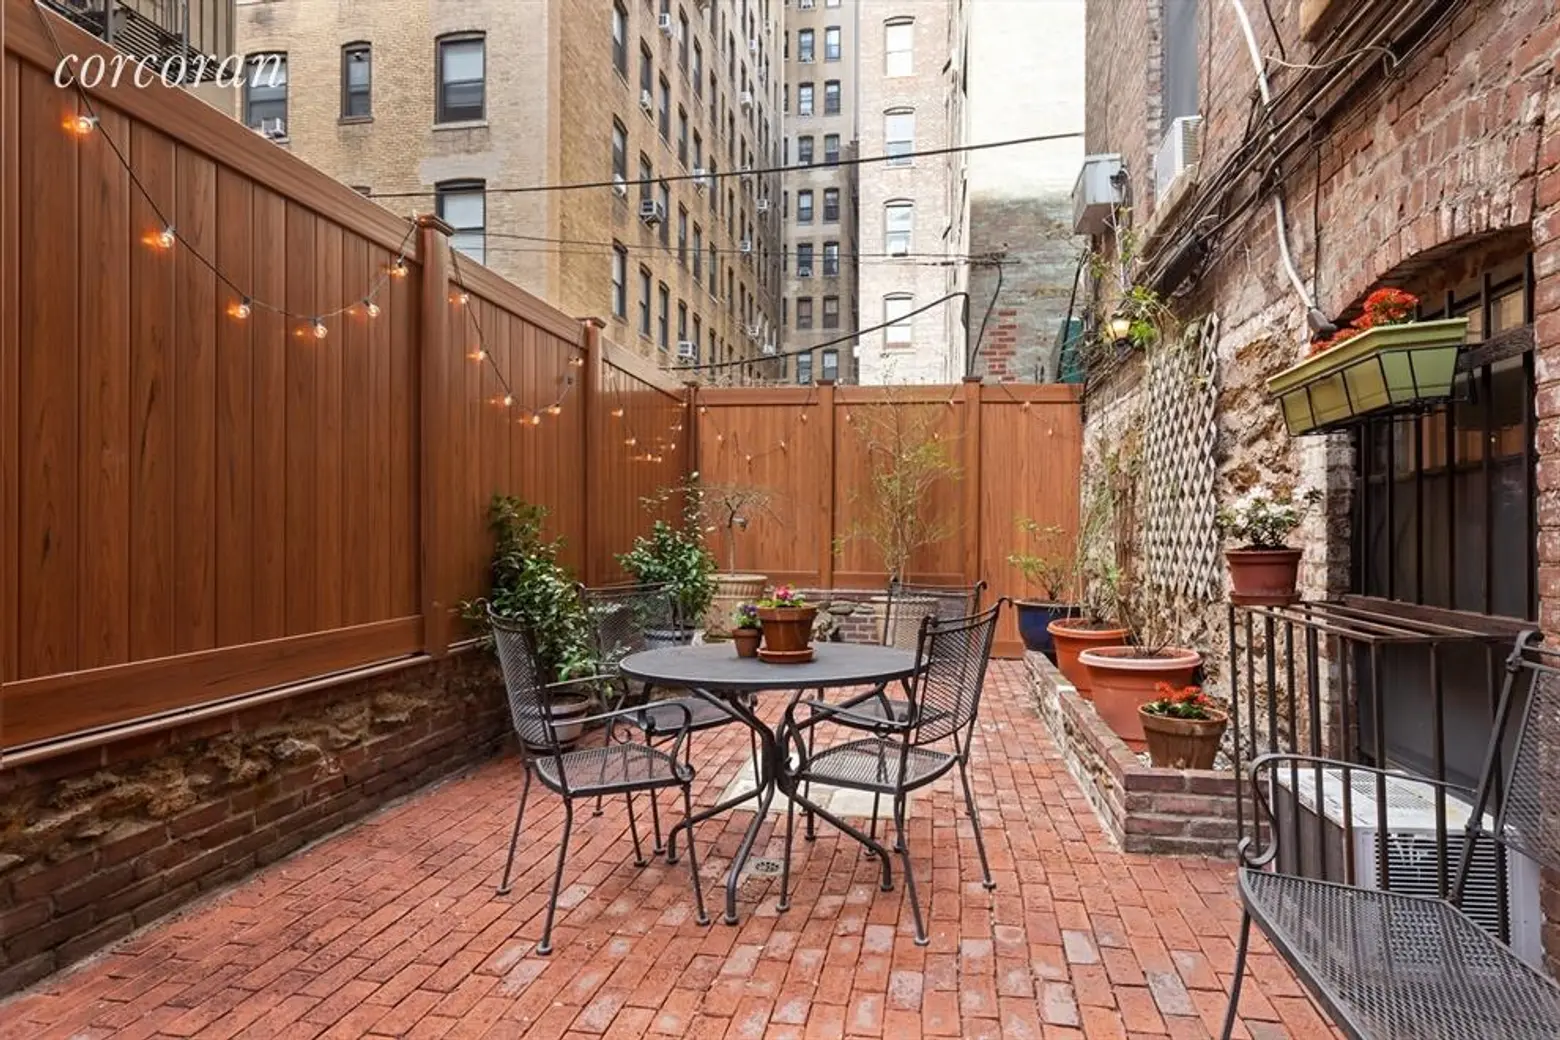 $1.35M Upper West Side co-op has two floors and a sunny private garden